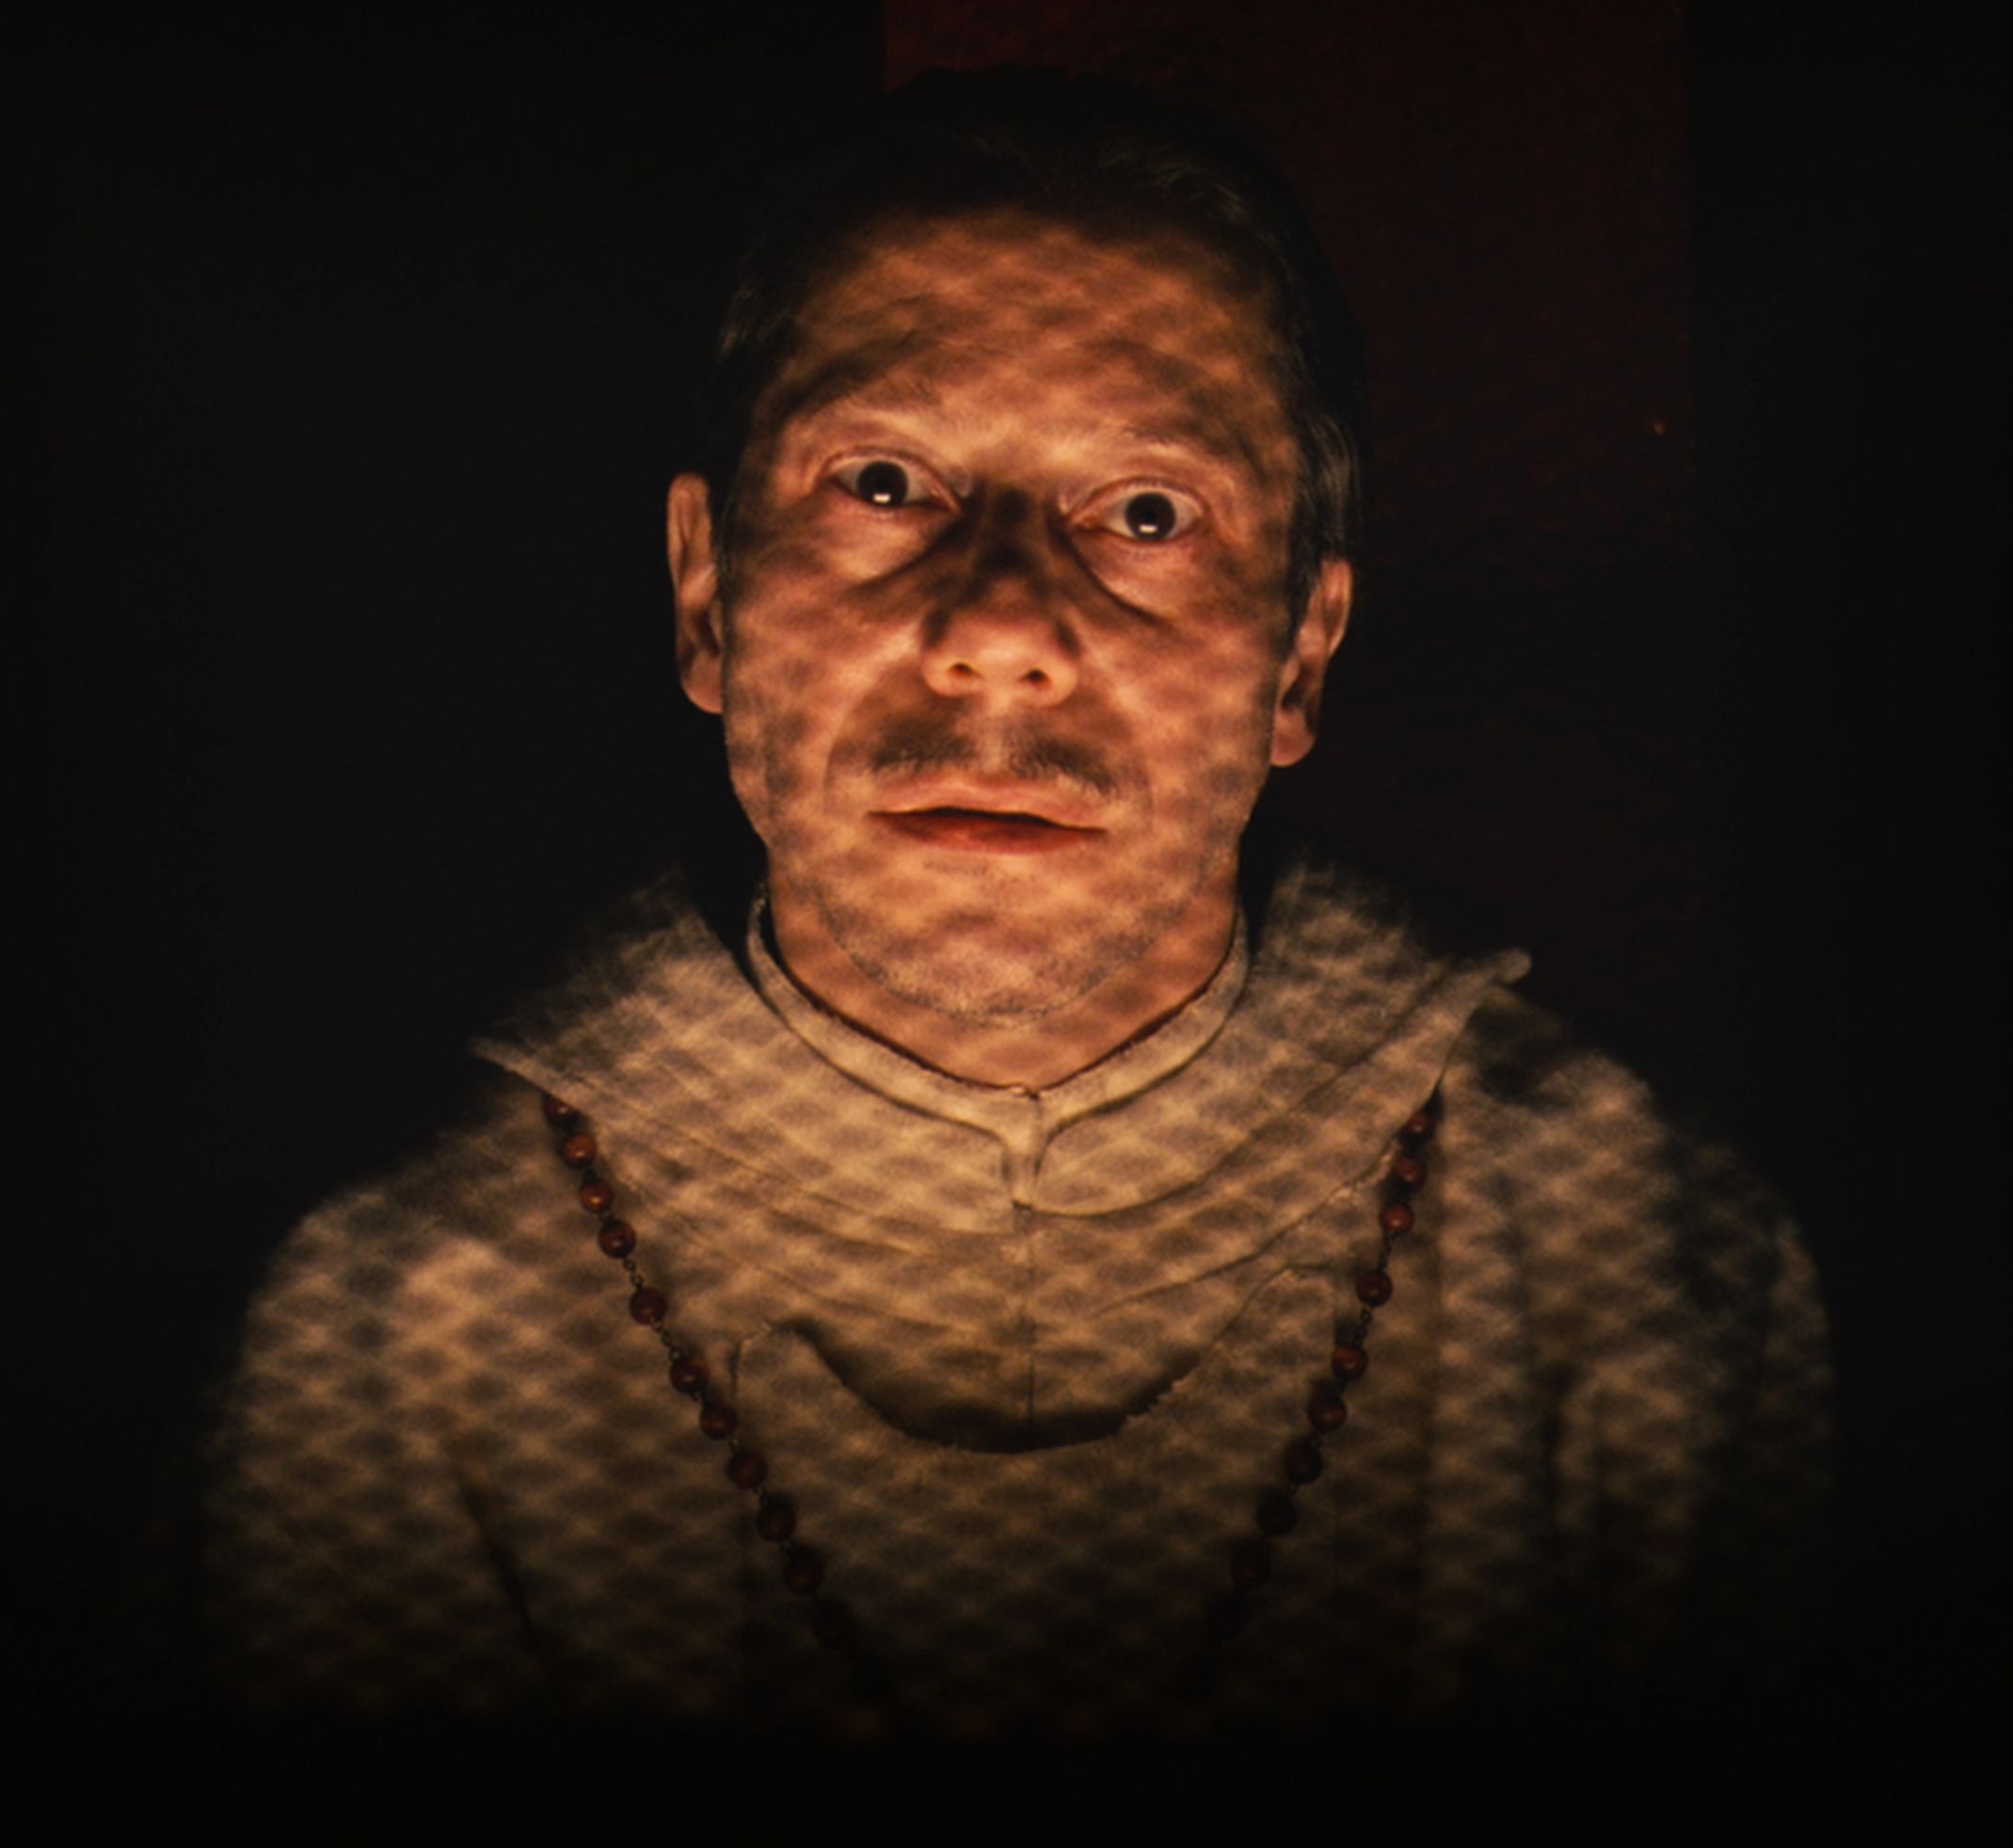 Mathieu Amalric in light as Serge X. - The Grand Budapest Ho